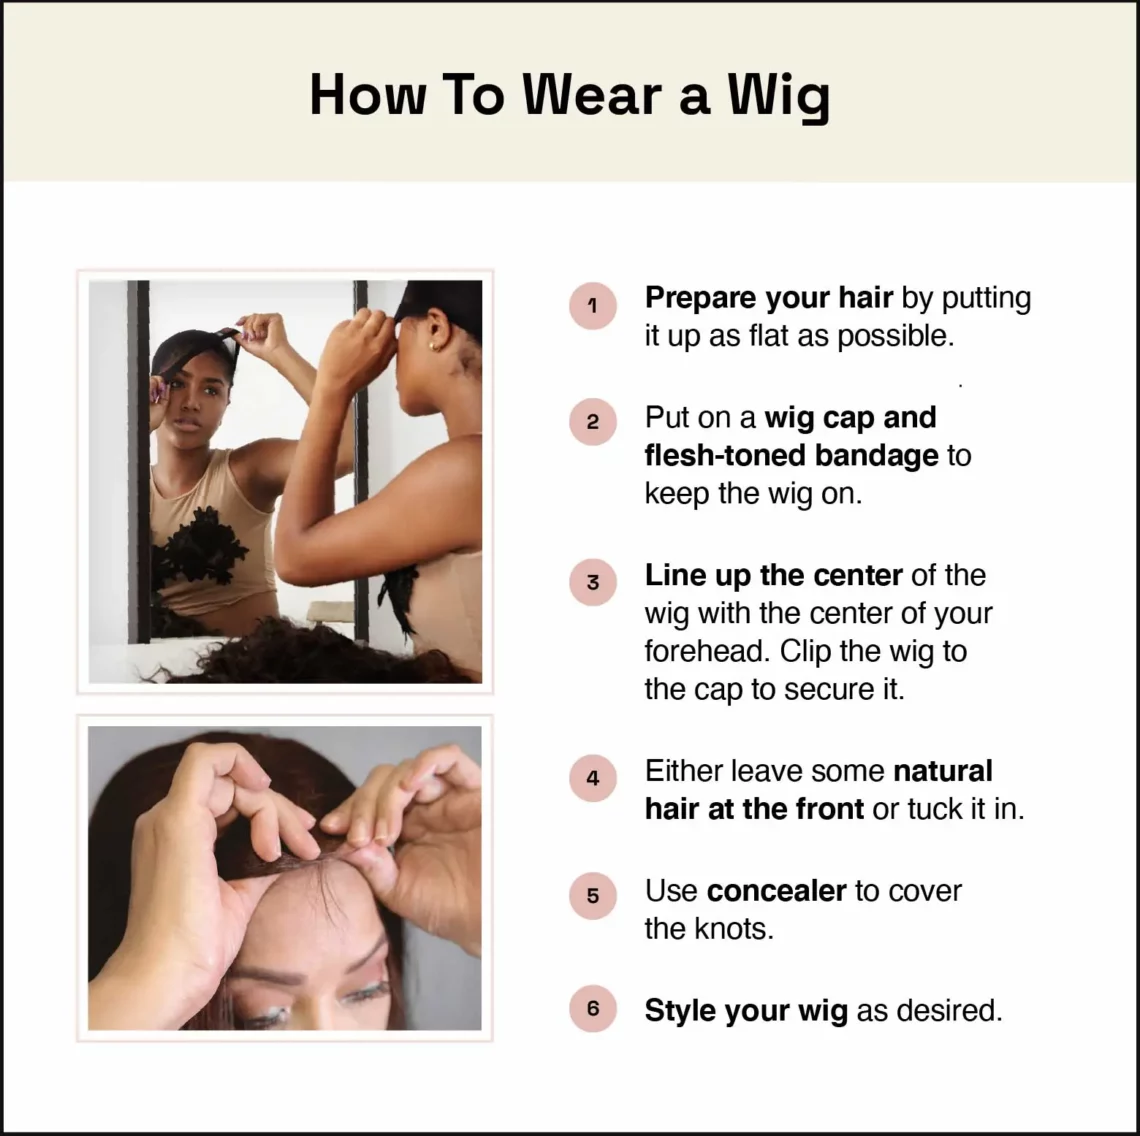 step-by-step instructions on how to wear a wig 